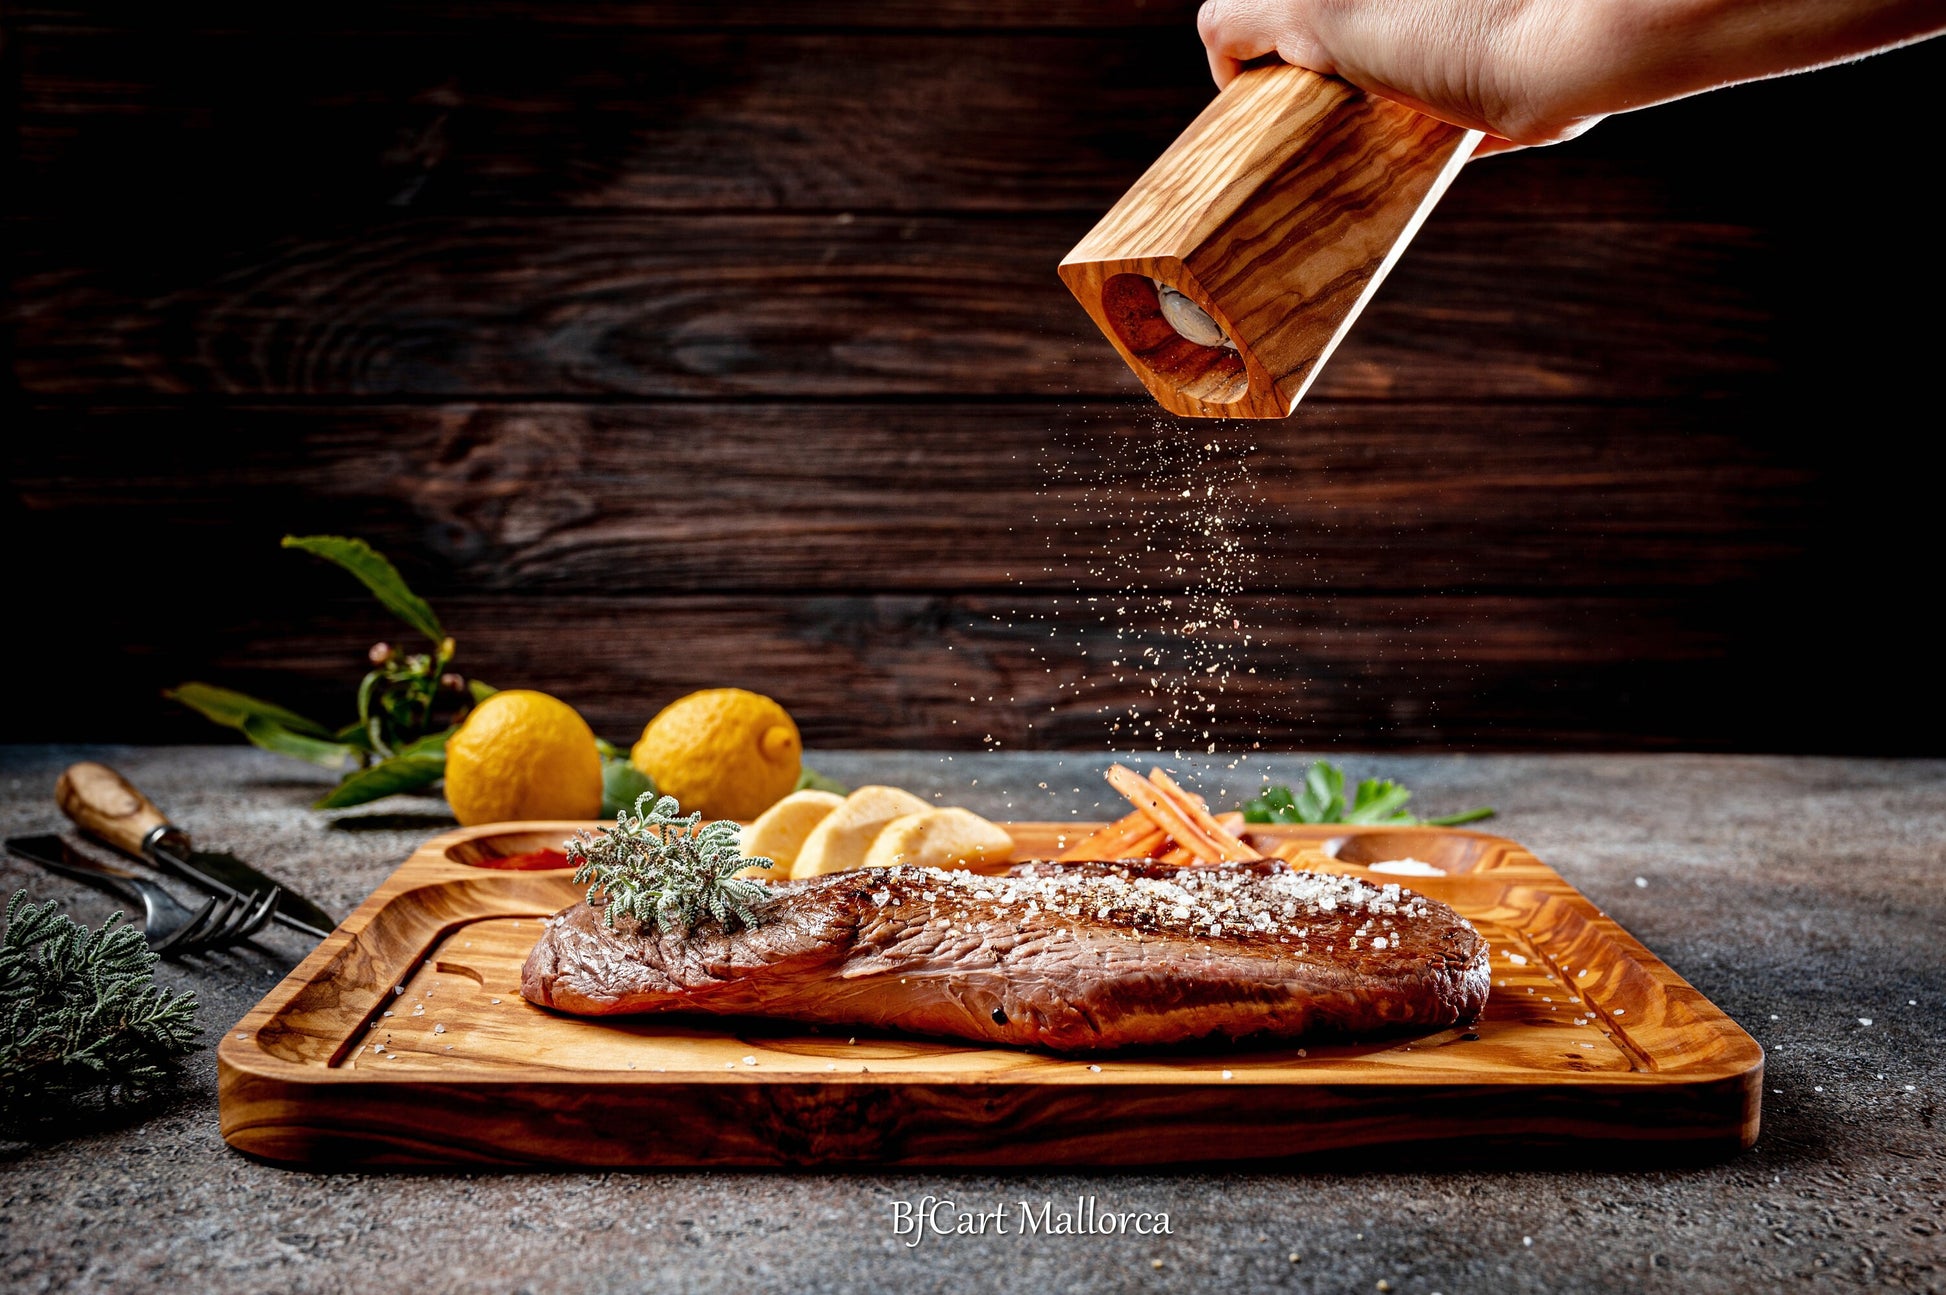 Steak Board for Meat and Barbecues, Steak Plate with Juice Channel, Olive Wood Steak Plate, Steak and BBQ Meals Serving Board, Grill Plate